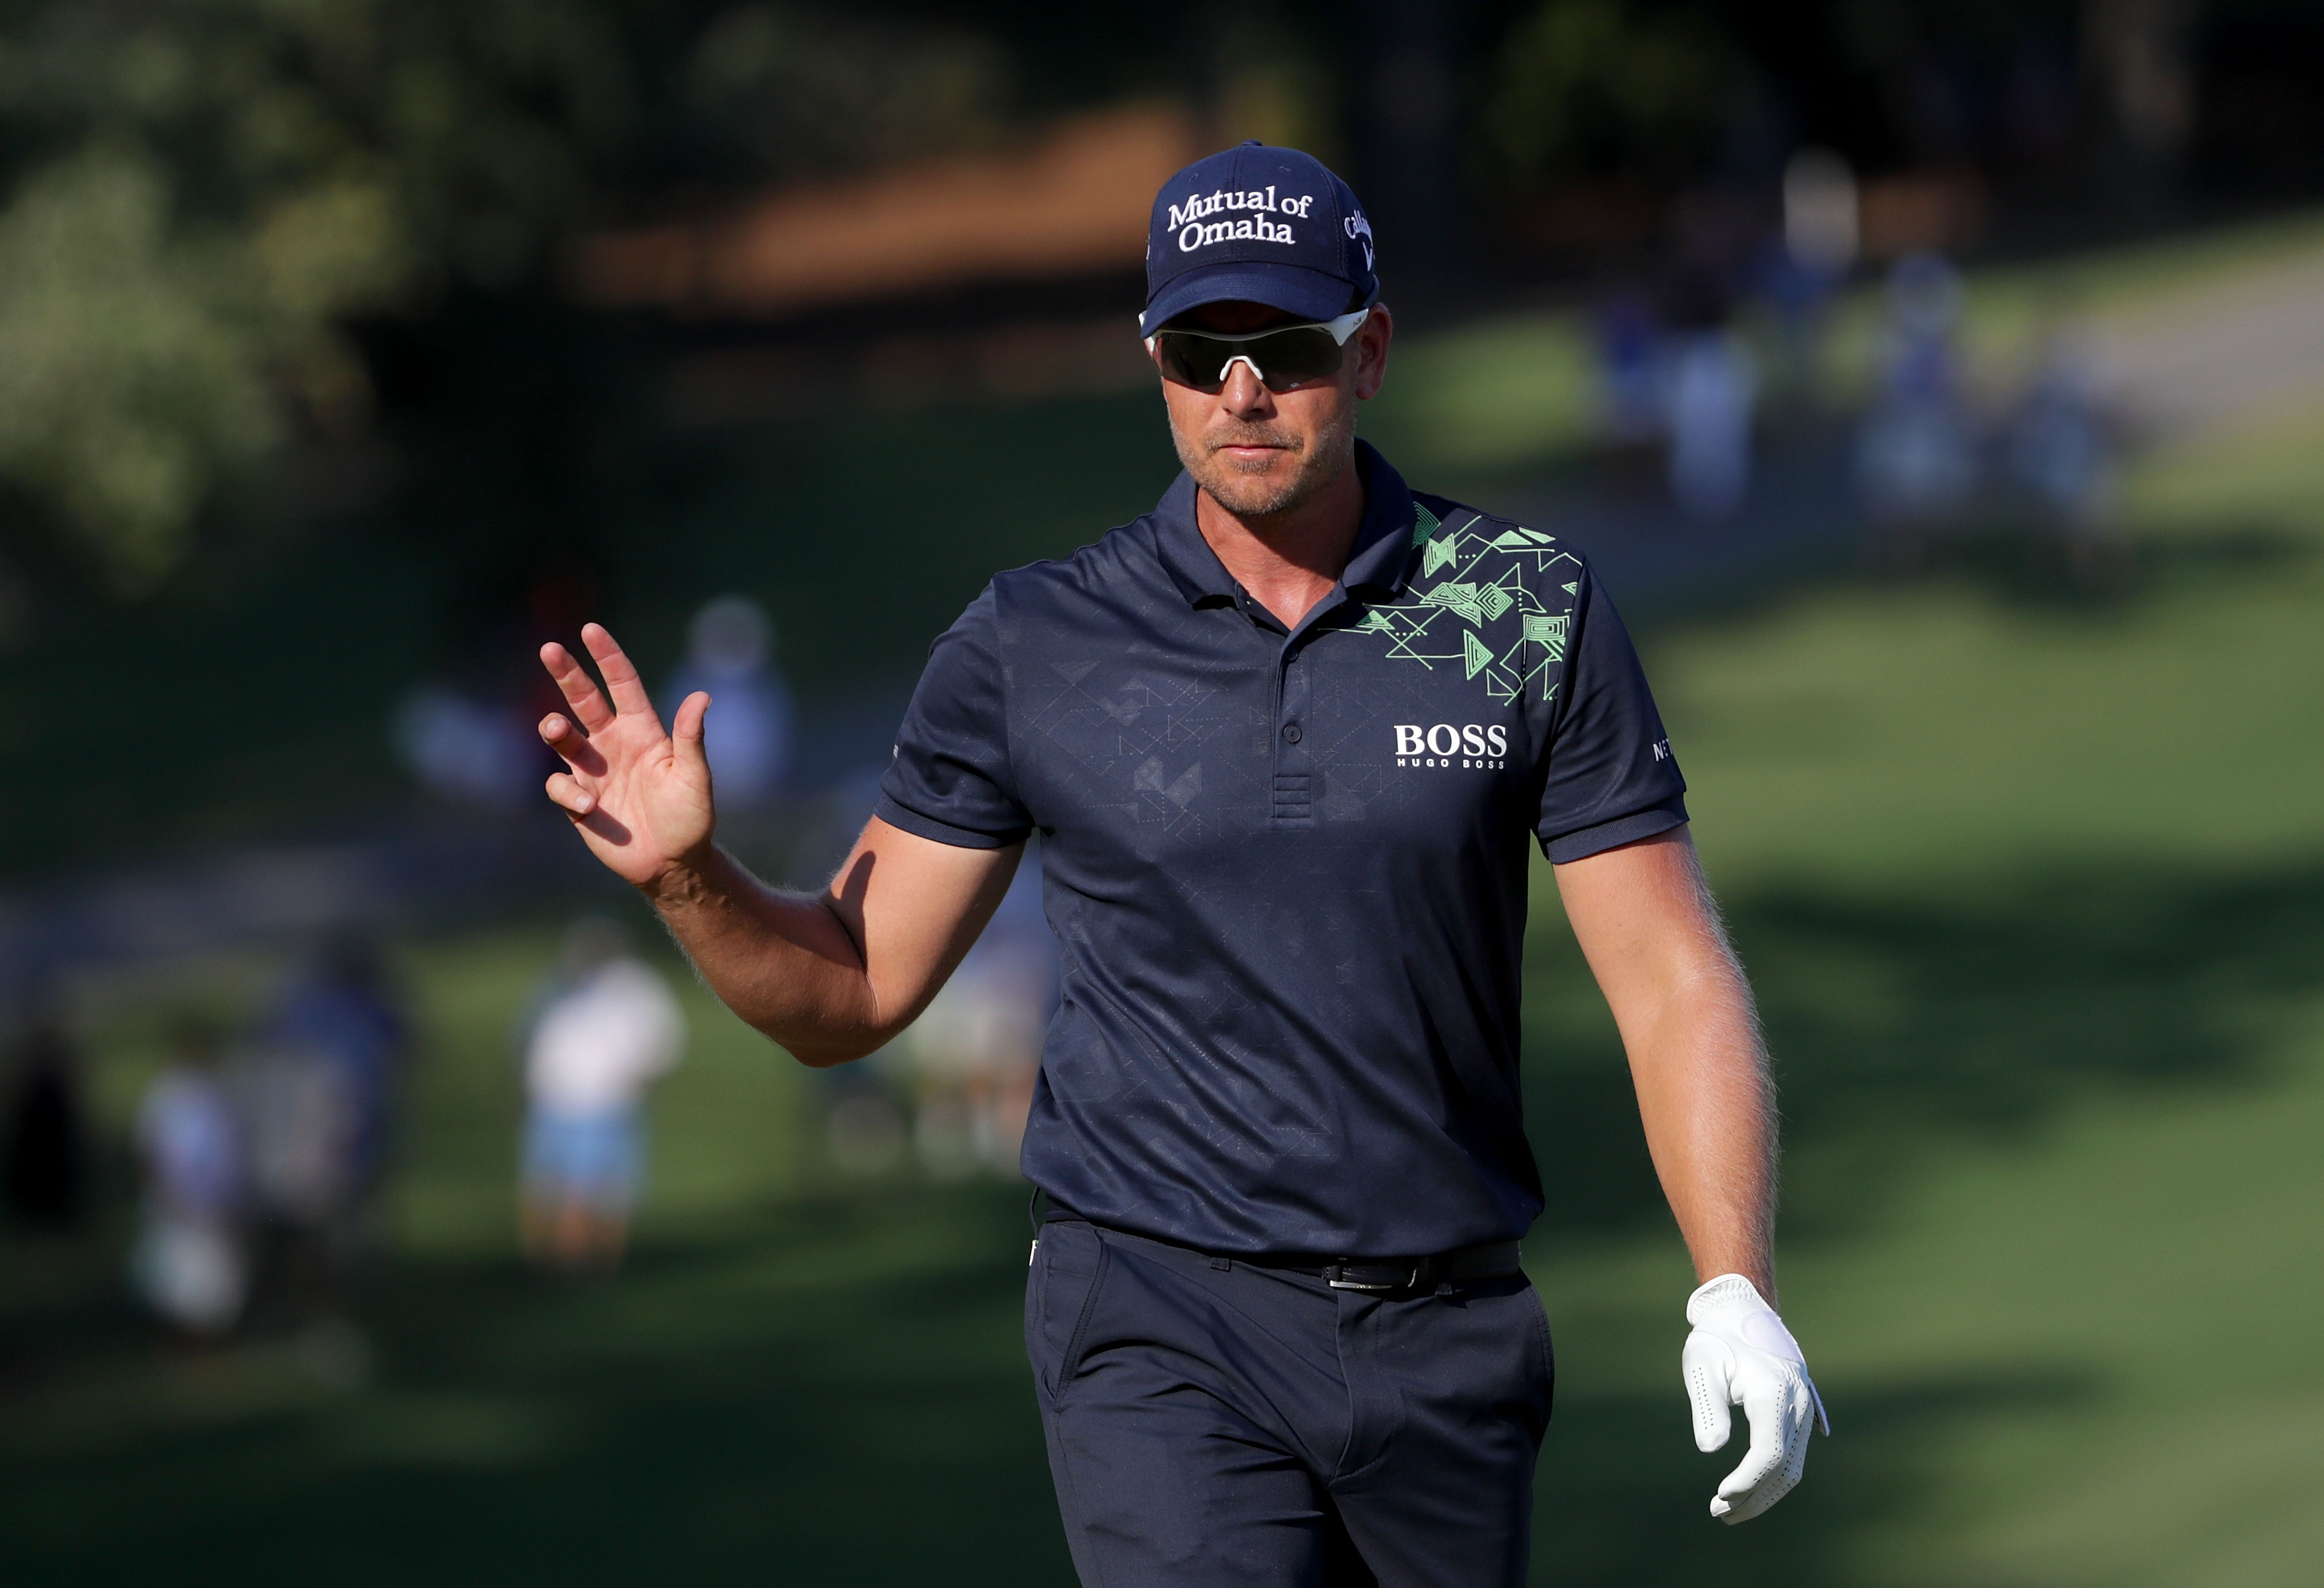 Henrik Stenson joins Rory McIlroy in dropping of first leg of FedEx Cup | Golf News and Tour Information |